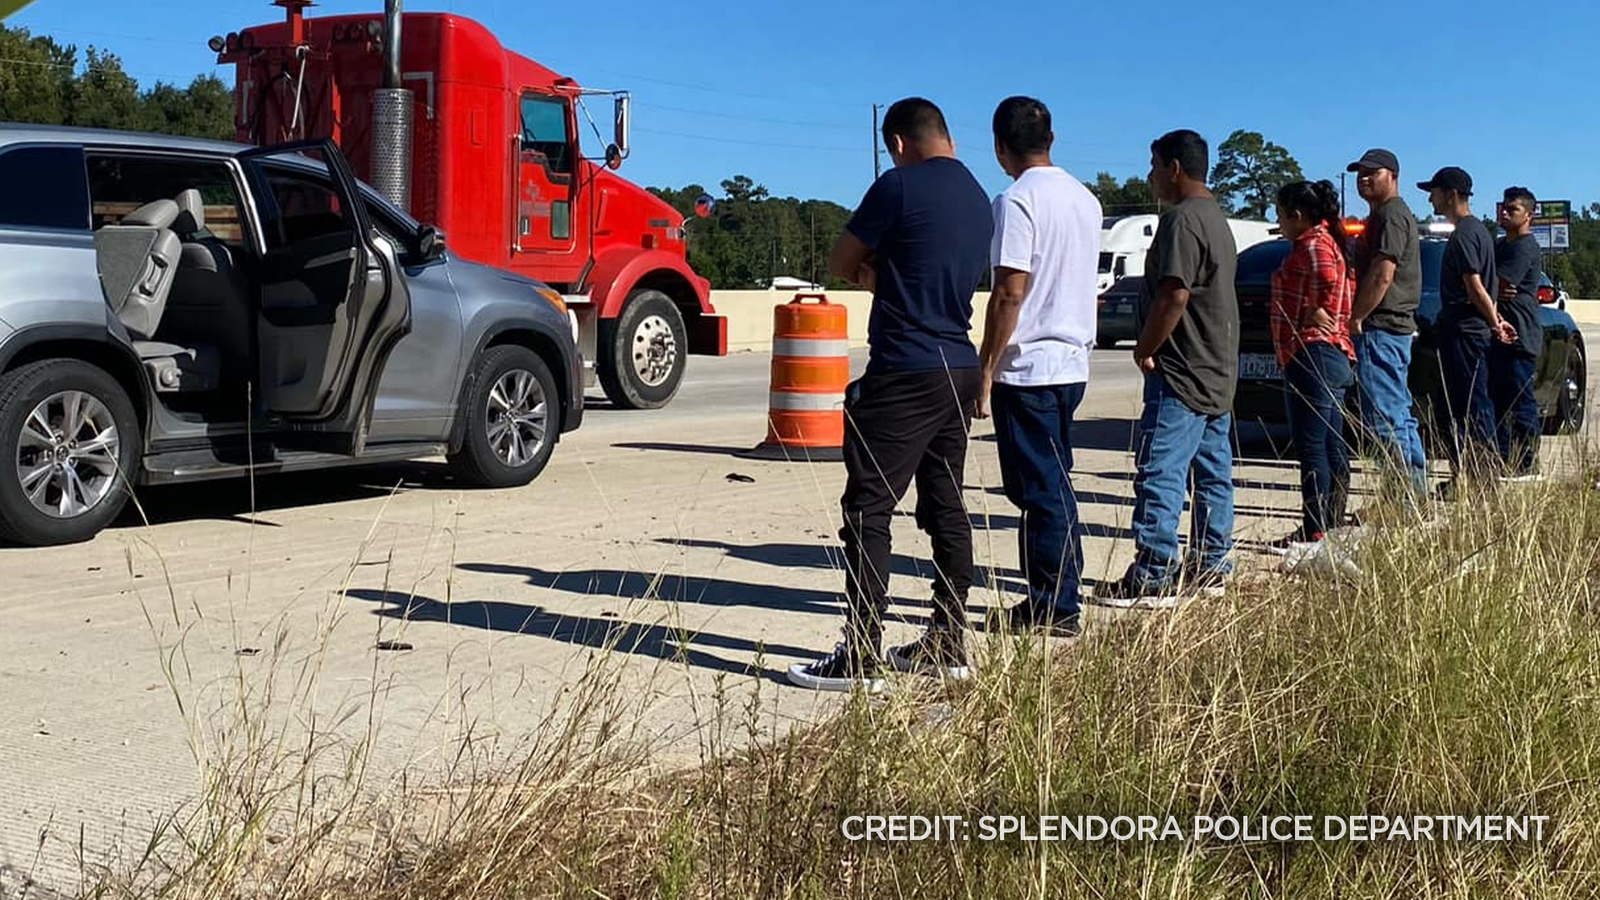   
																Driver arrested after smuggling 7 undocumented immigrants in Splendora, police say 
															 